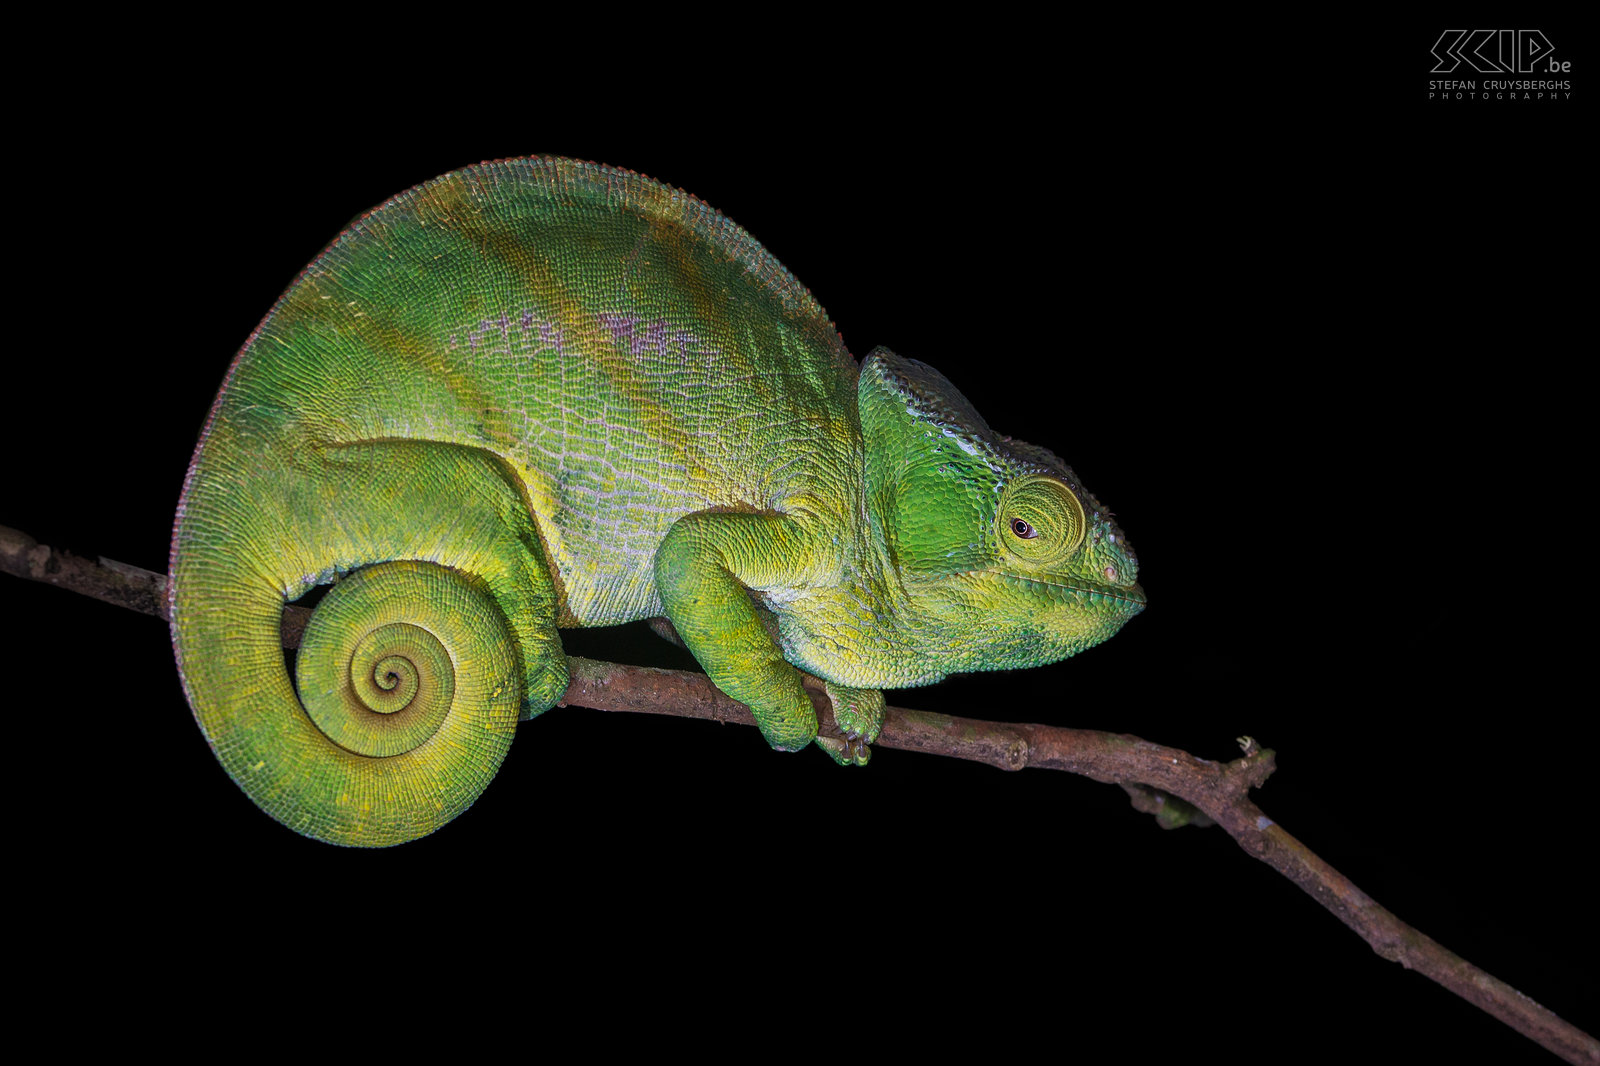 Andasibe - Parson's chameleon A female Parson's chameleon (Calumma parsonii) in the rainforest of Andasibe. The Parson’s chameleon is one of the largest species of chameleons (up to 45cm) and it is endemic to isolated regions of humid primary forest in eastern and northern Madagascar. Stefan Cruysberghs